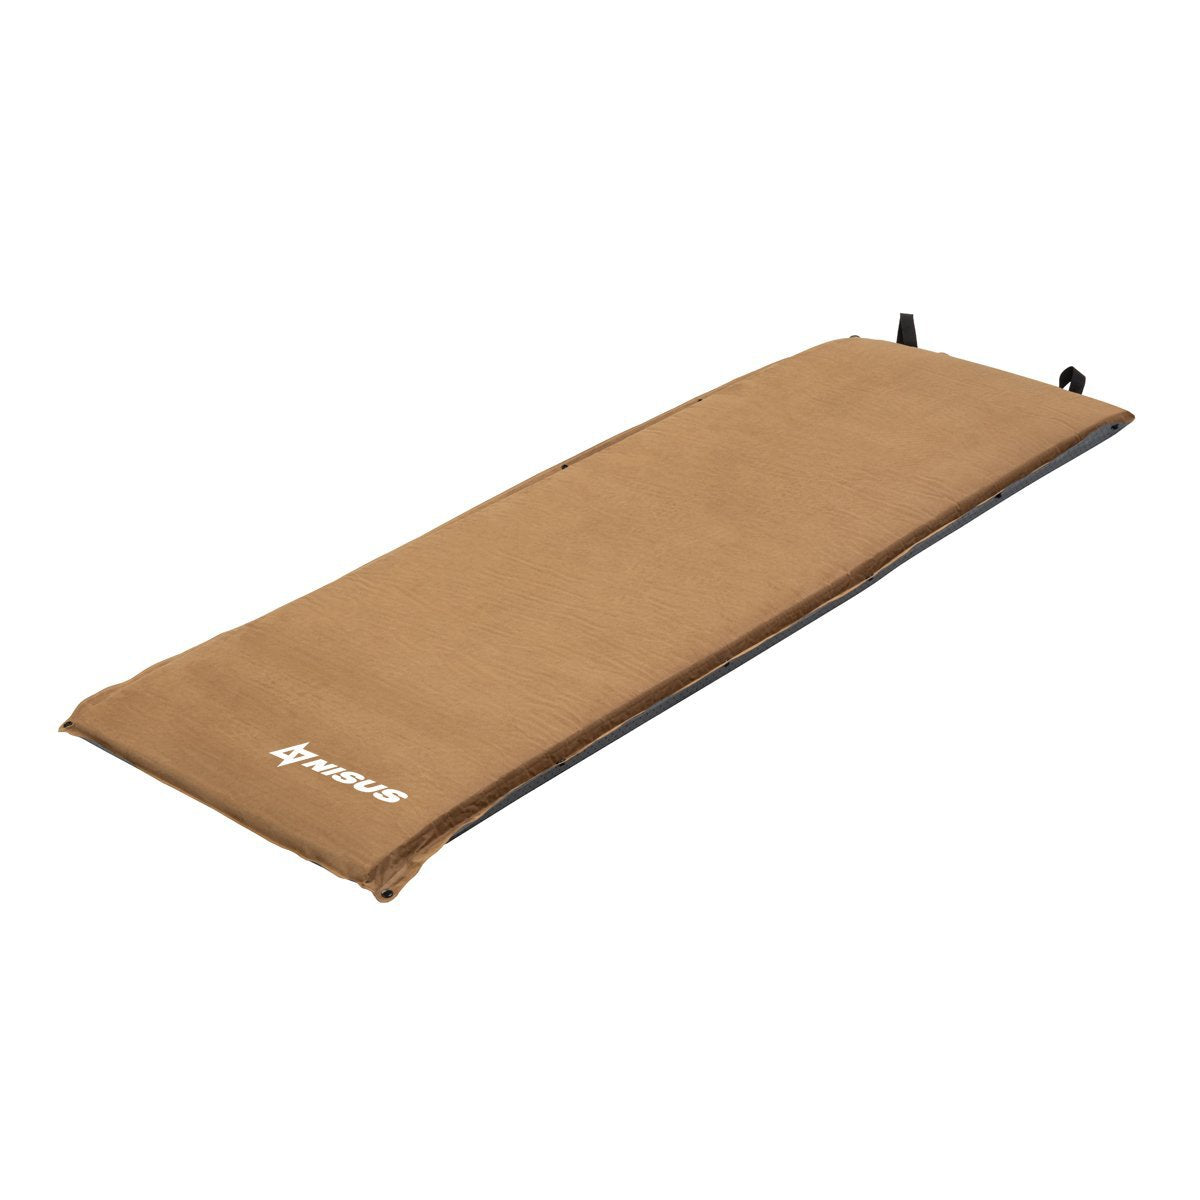 2-inch Lightweight Self Inflating Camping Sleeping Pad, Beige Color